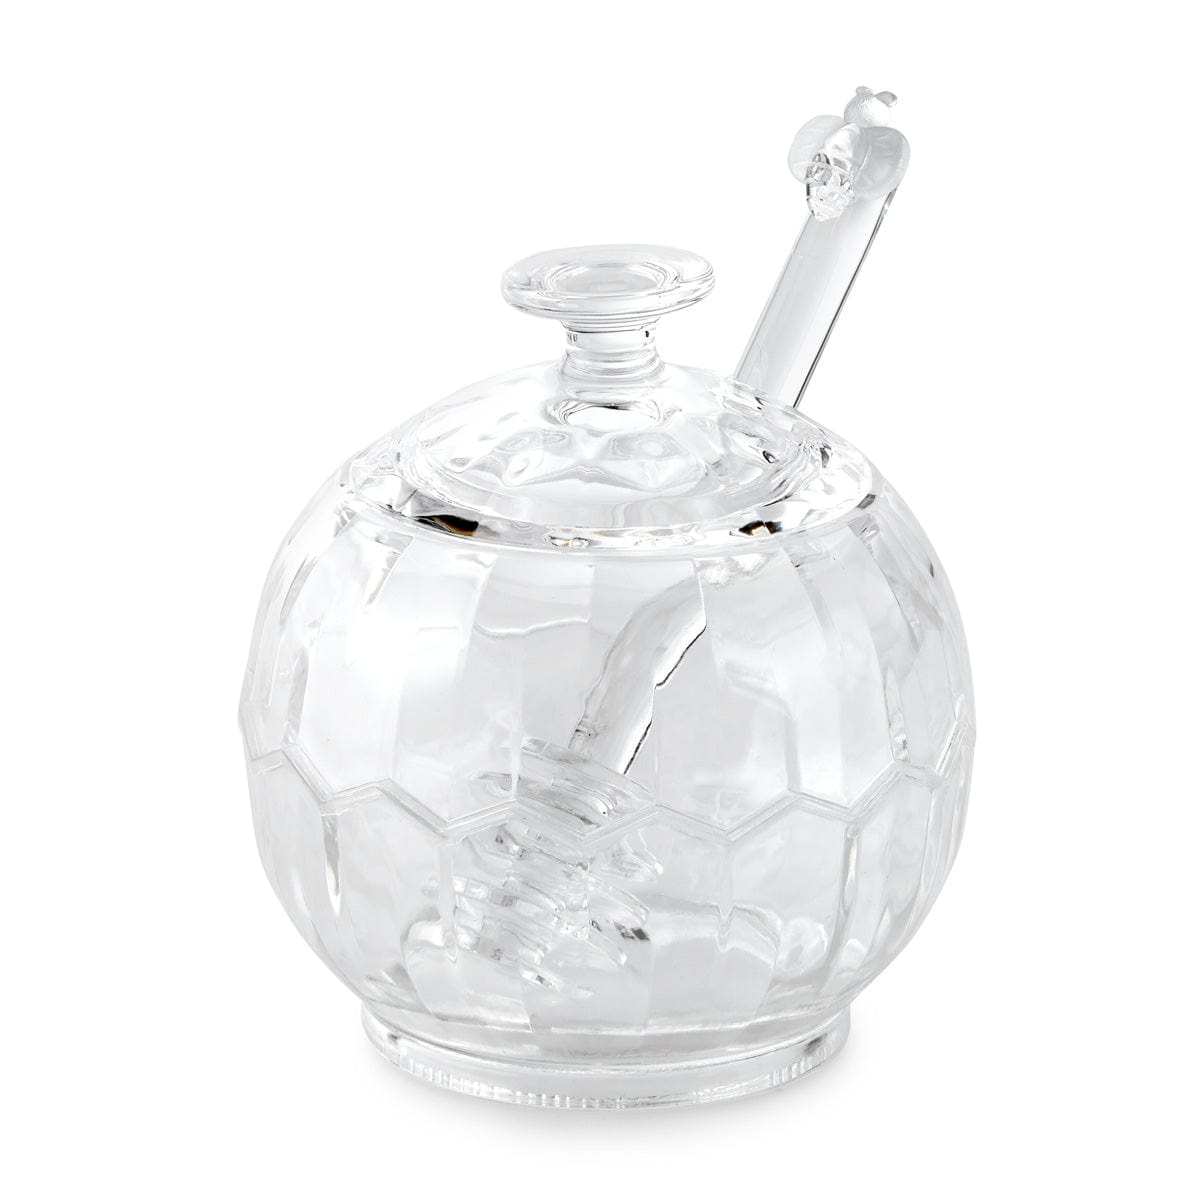 Huang Acrylic Inc. Huang Acrylic Sphere Shaped Honey Jar with Server - Little Miss Muffin Children & Home